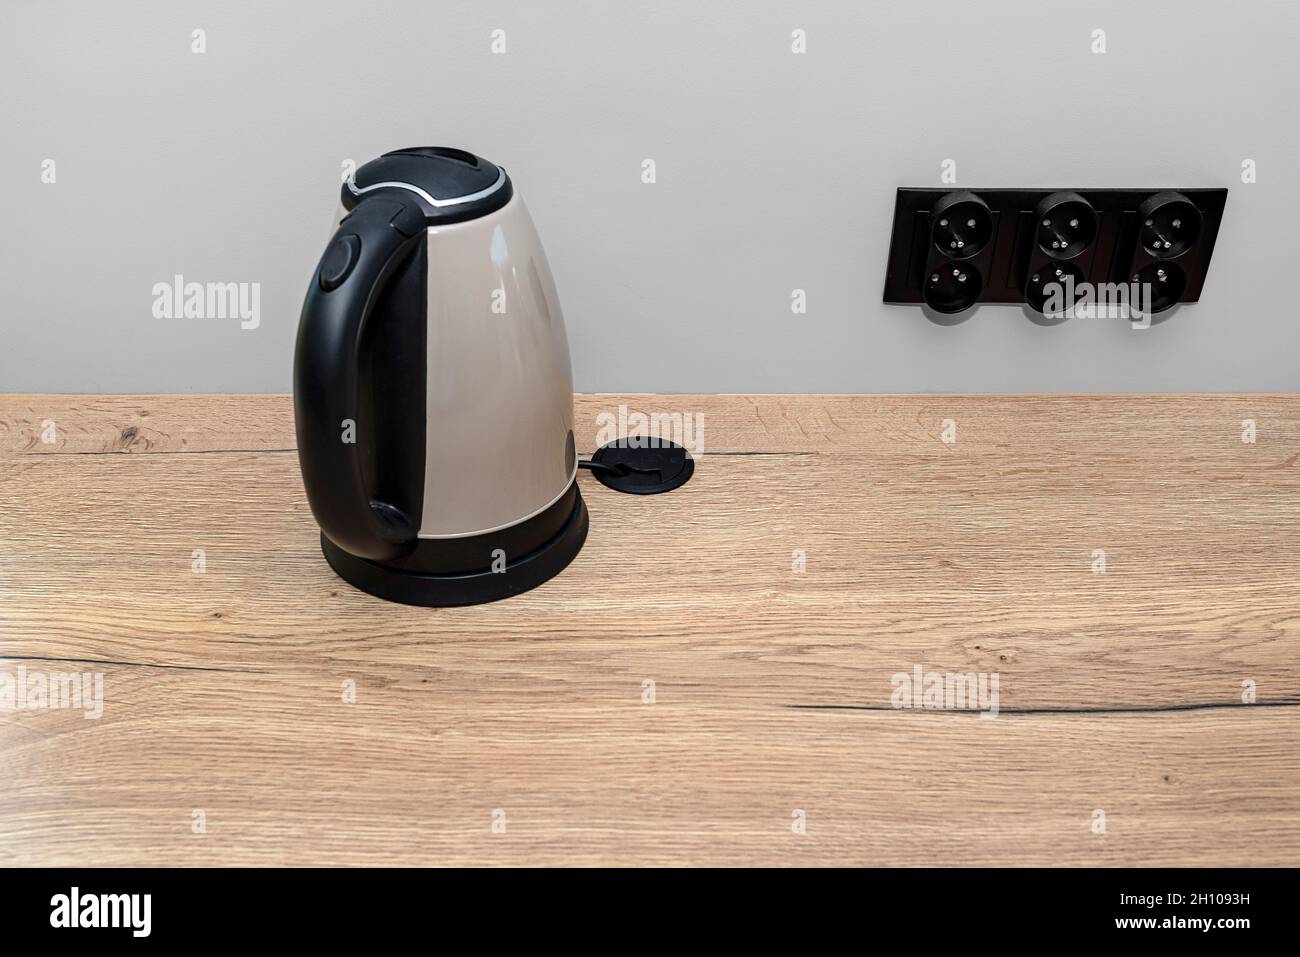 https://c8.alamy.com/comp/2H1093H/an-electric-kettle-standing-on-the-countertop-on-the-kitchen-cabinets-visible-hole-in-the-table-top-through-which-the-electric-cable-goes-2H1093H.jpg